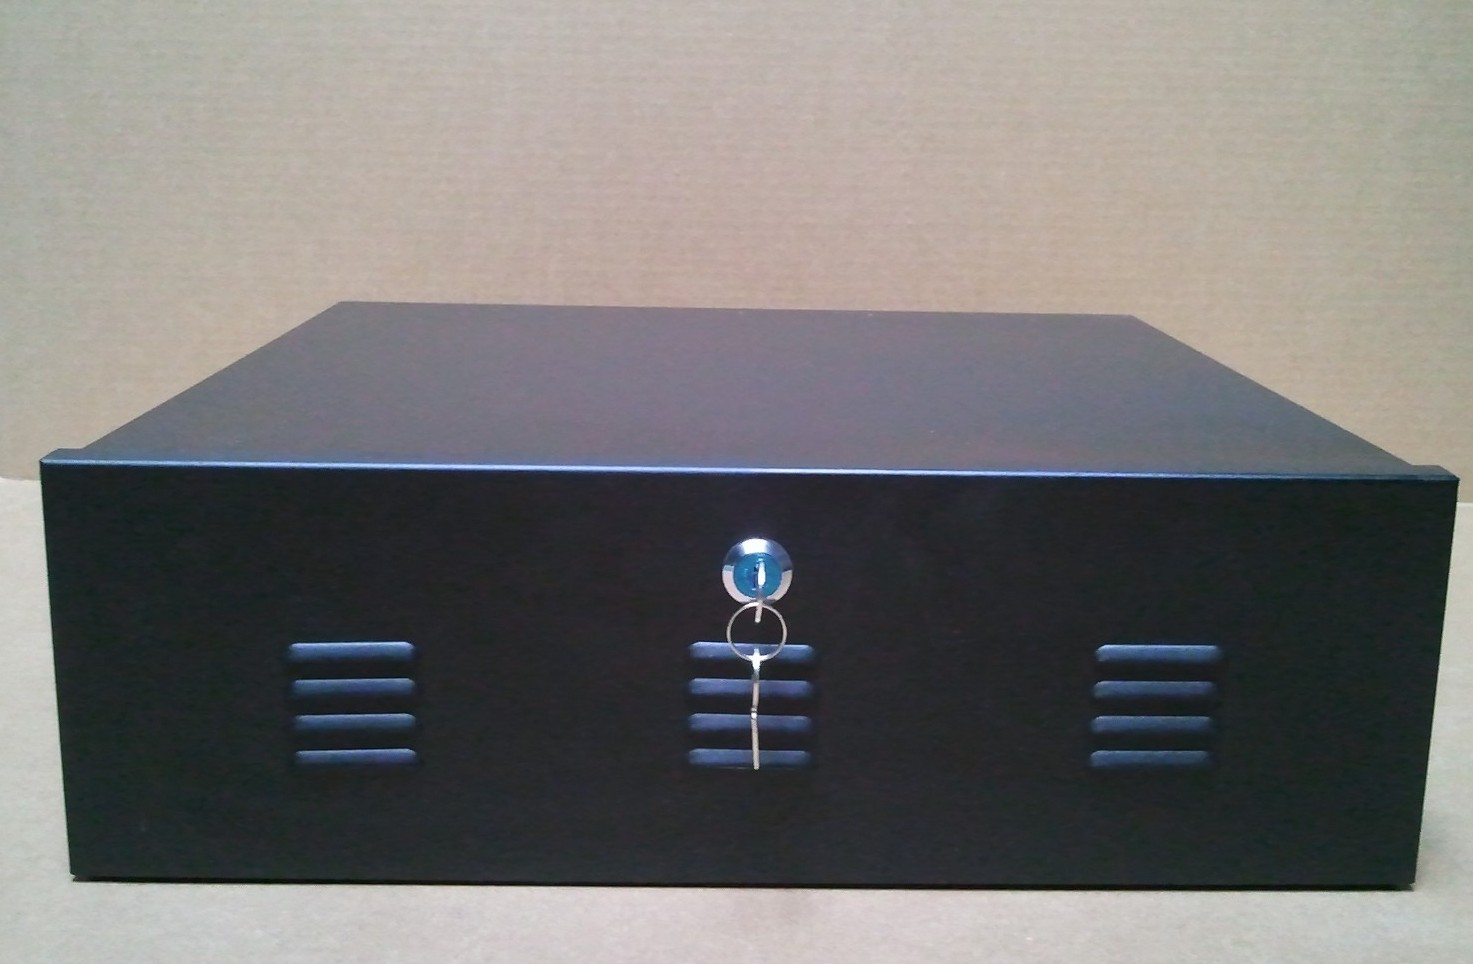 DVR/VCR Lockbox With Built in Blower(cooler) 18” W x 18” L x 5.5” H